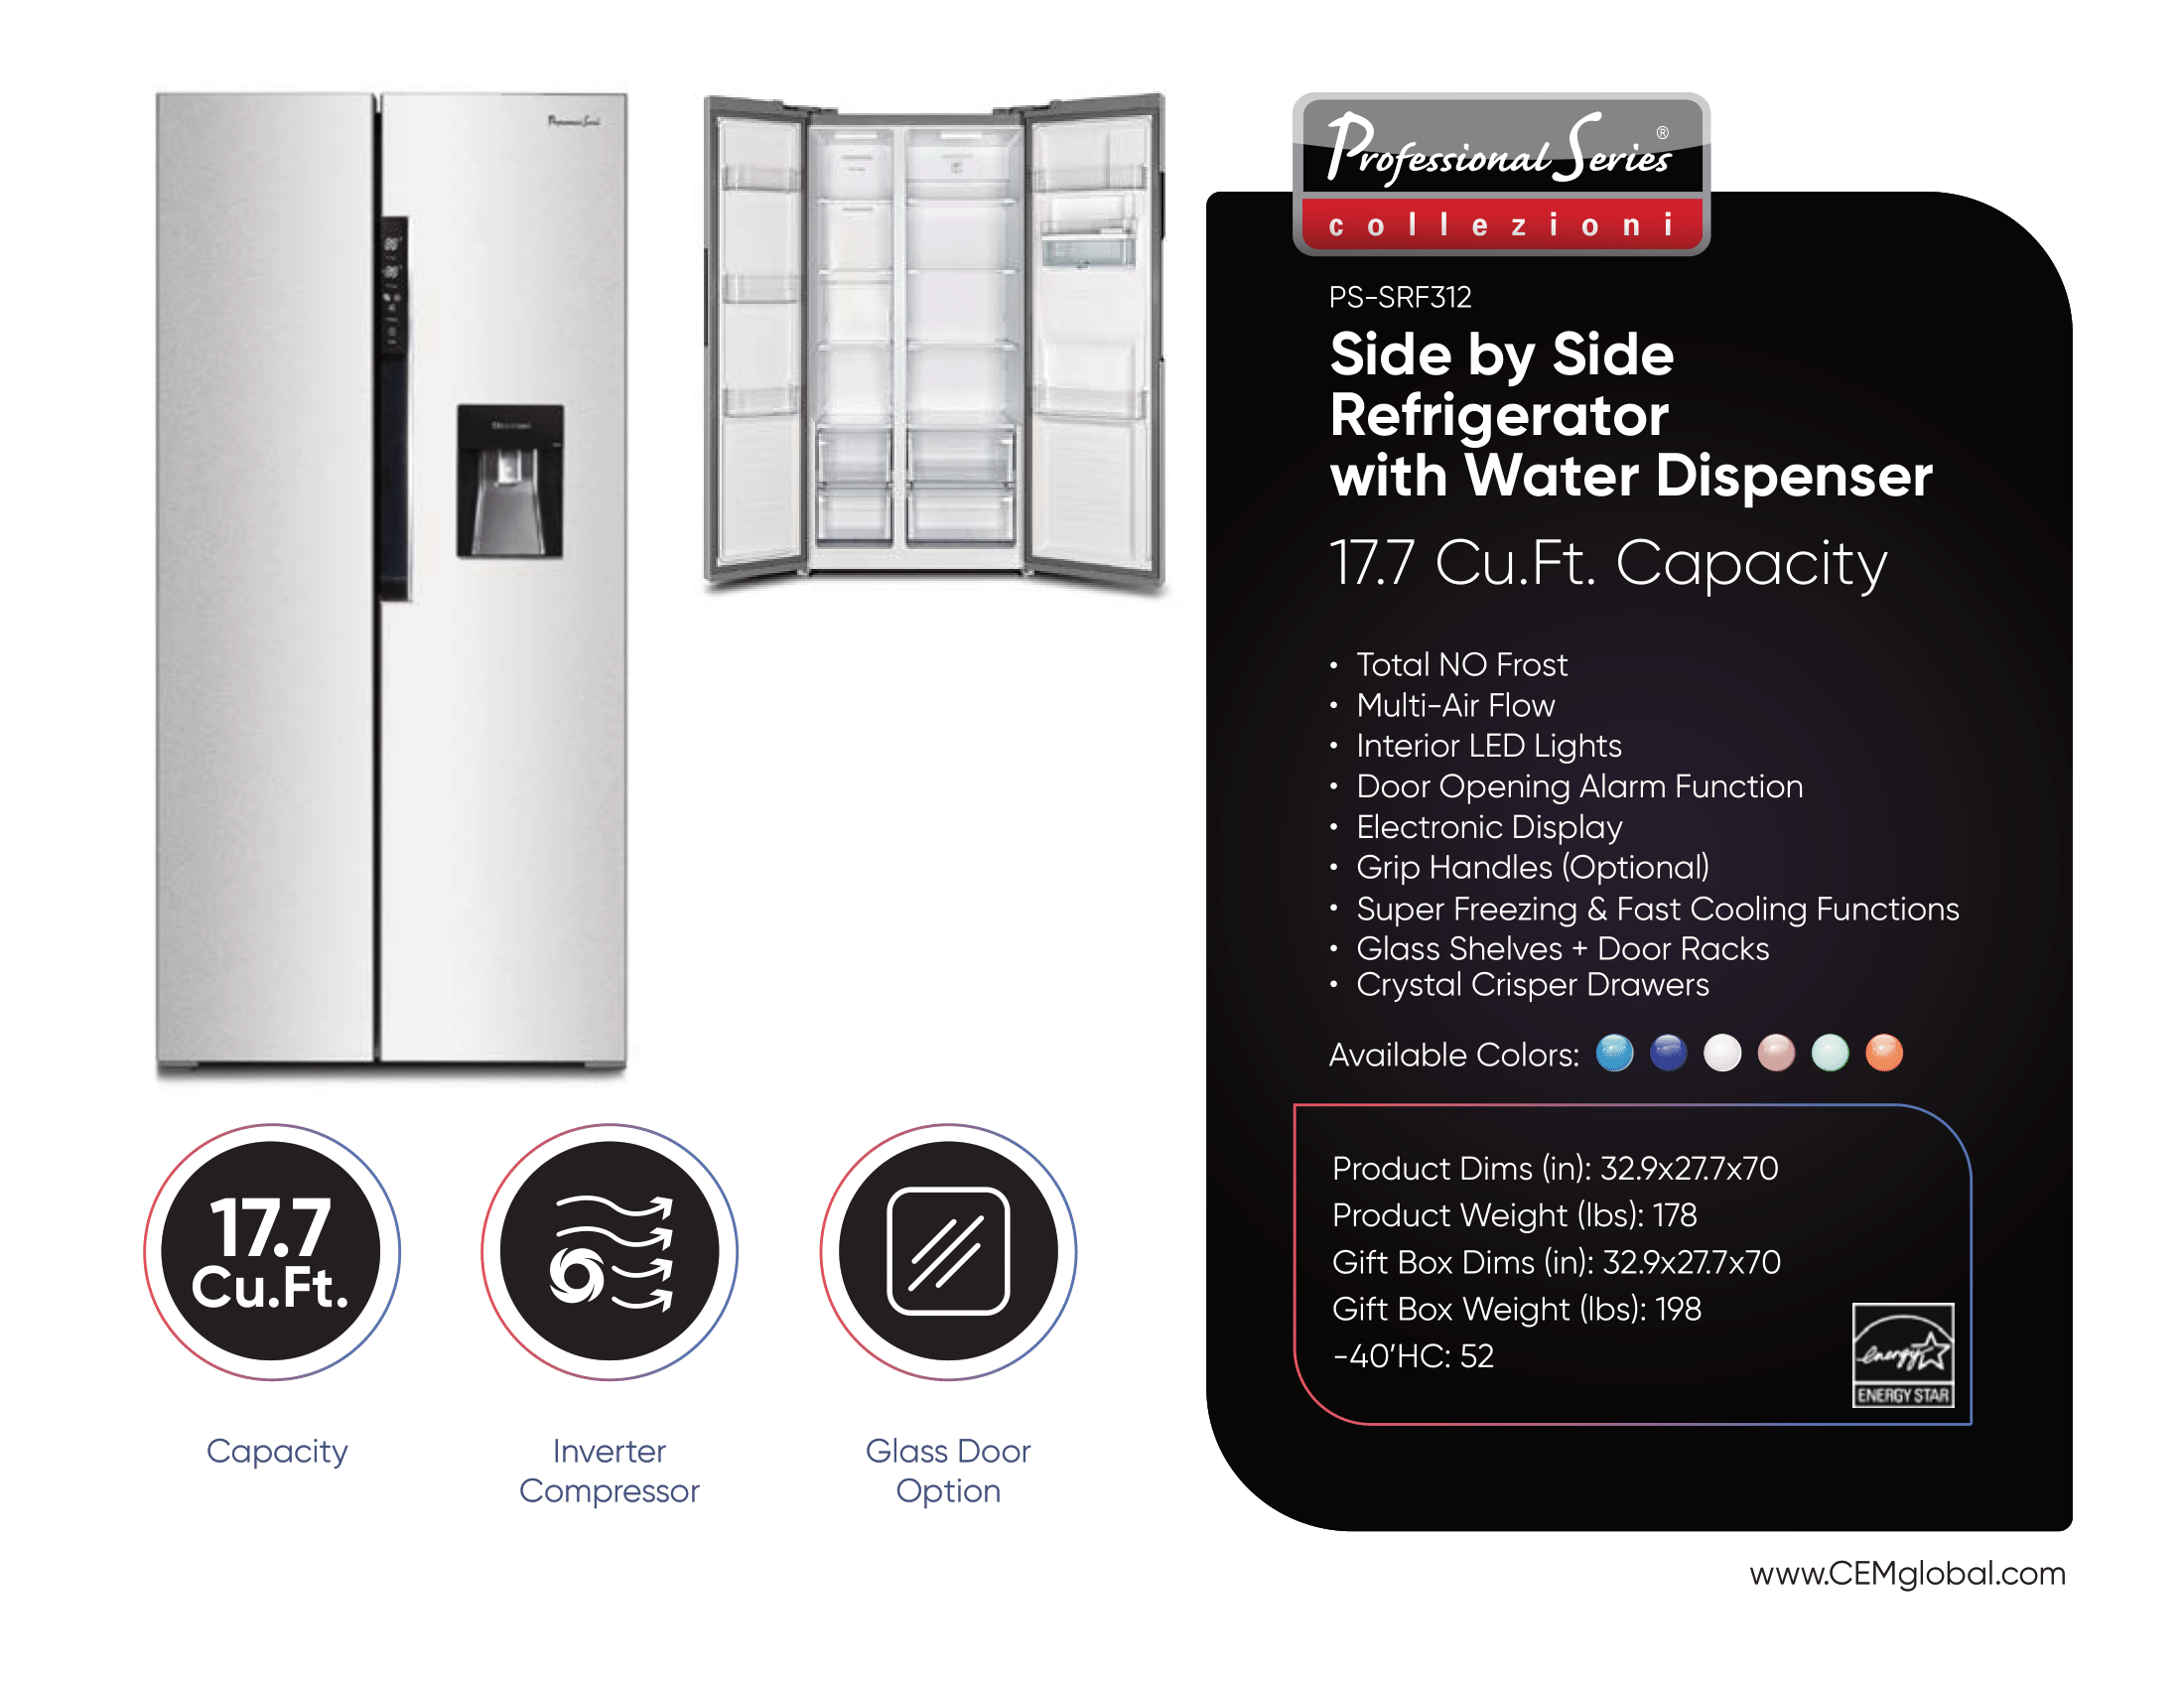 Side by Side Refrigerator with Water Dispenser 17.7 Cu.Ft.